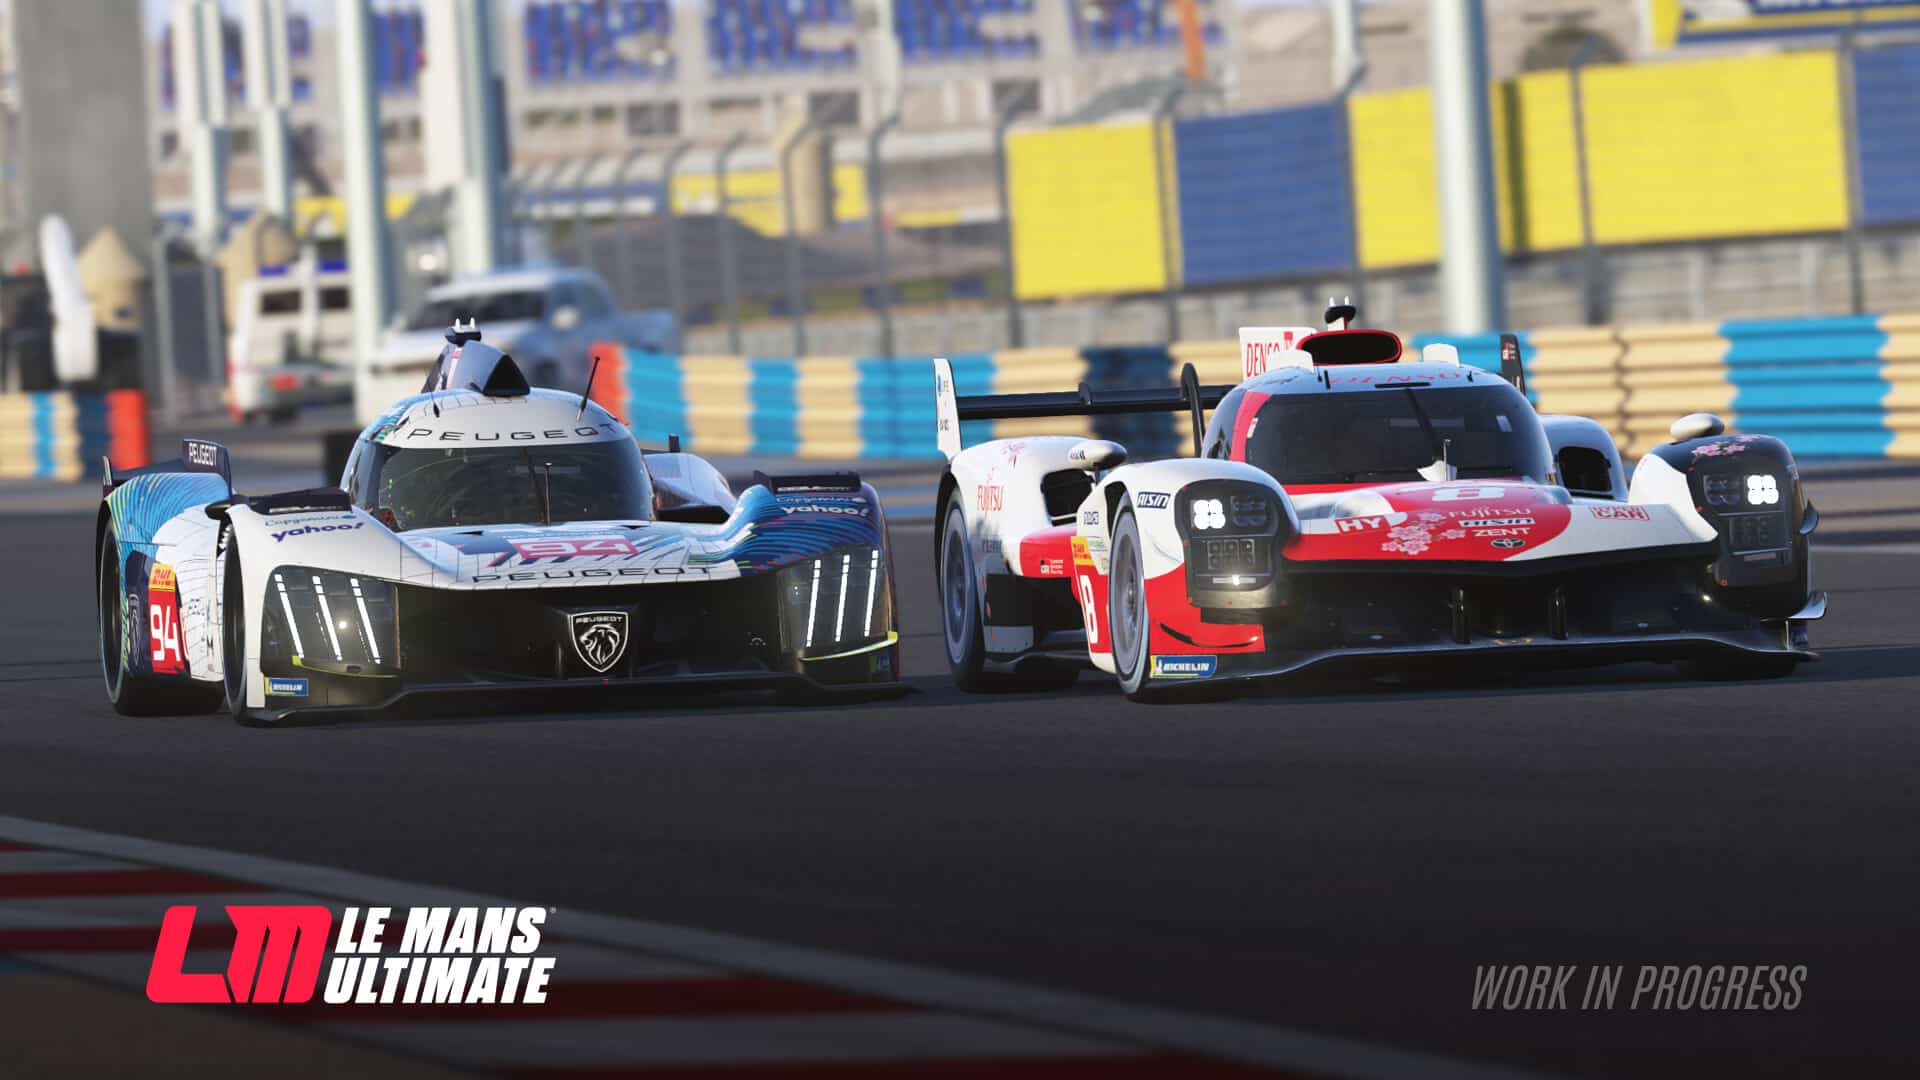 Le Mans Ultimate Force Feedback not working on many wheels: Is there any fix yet?